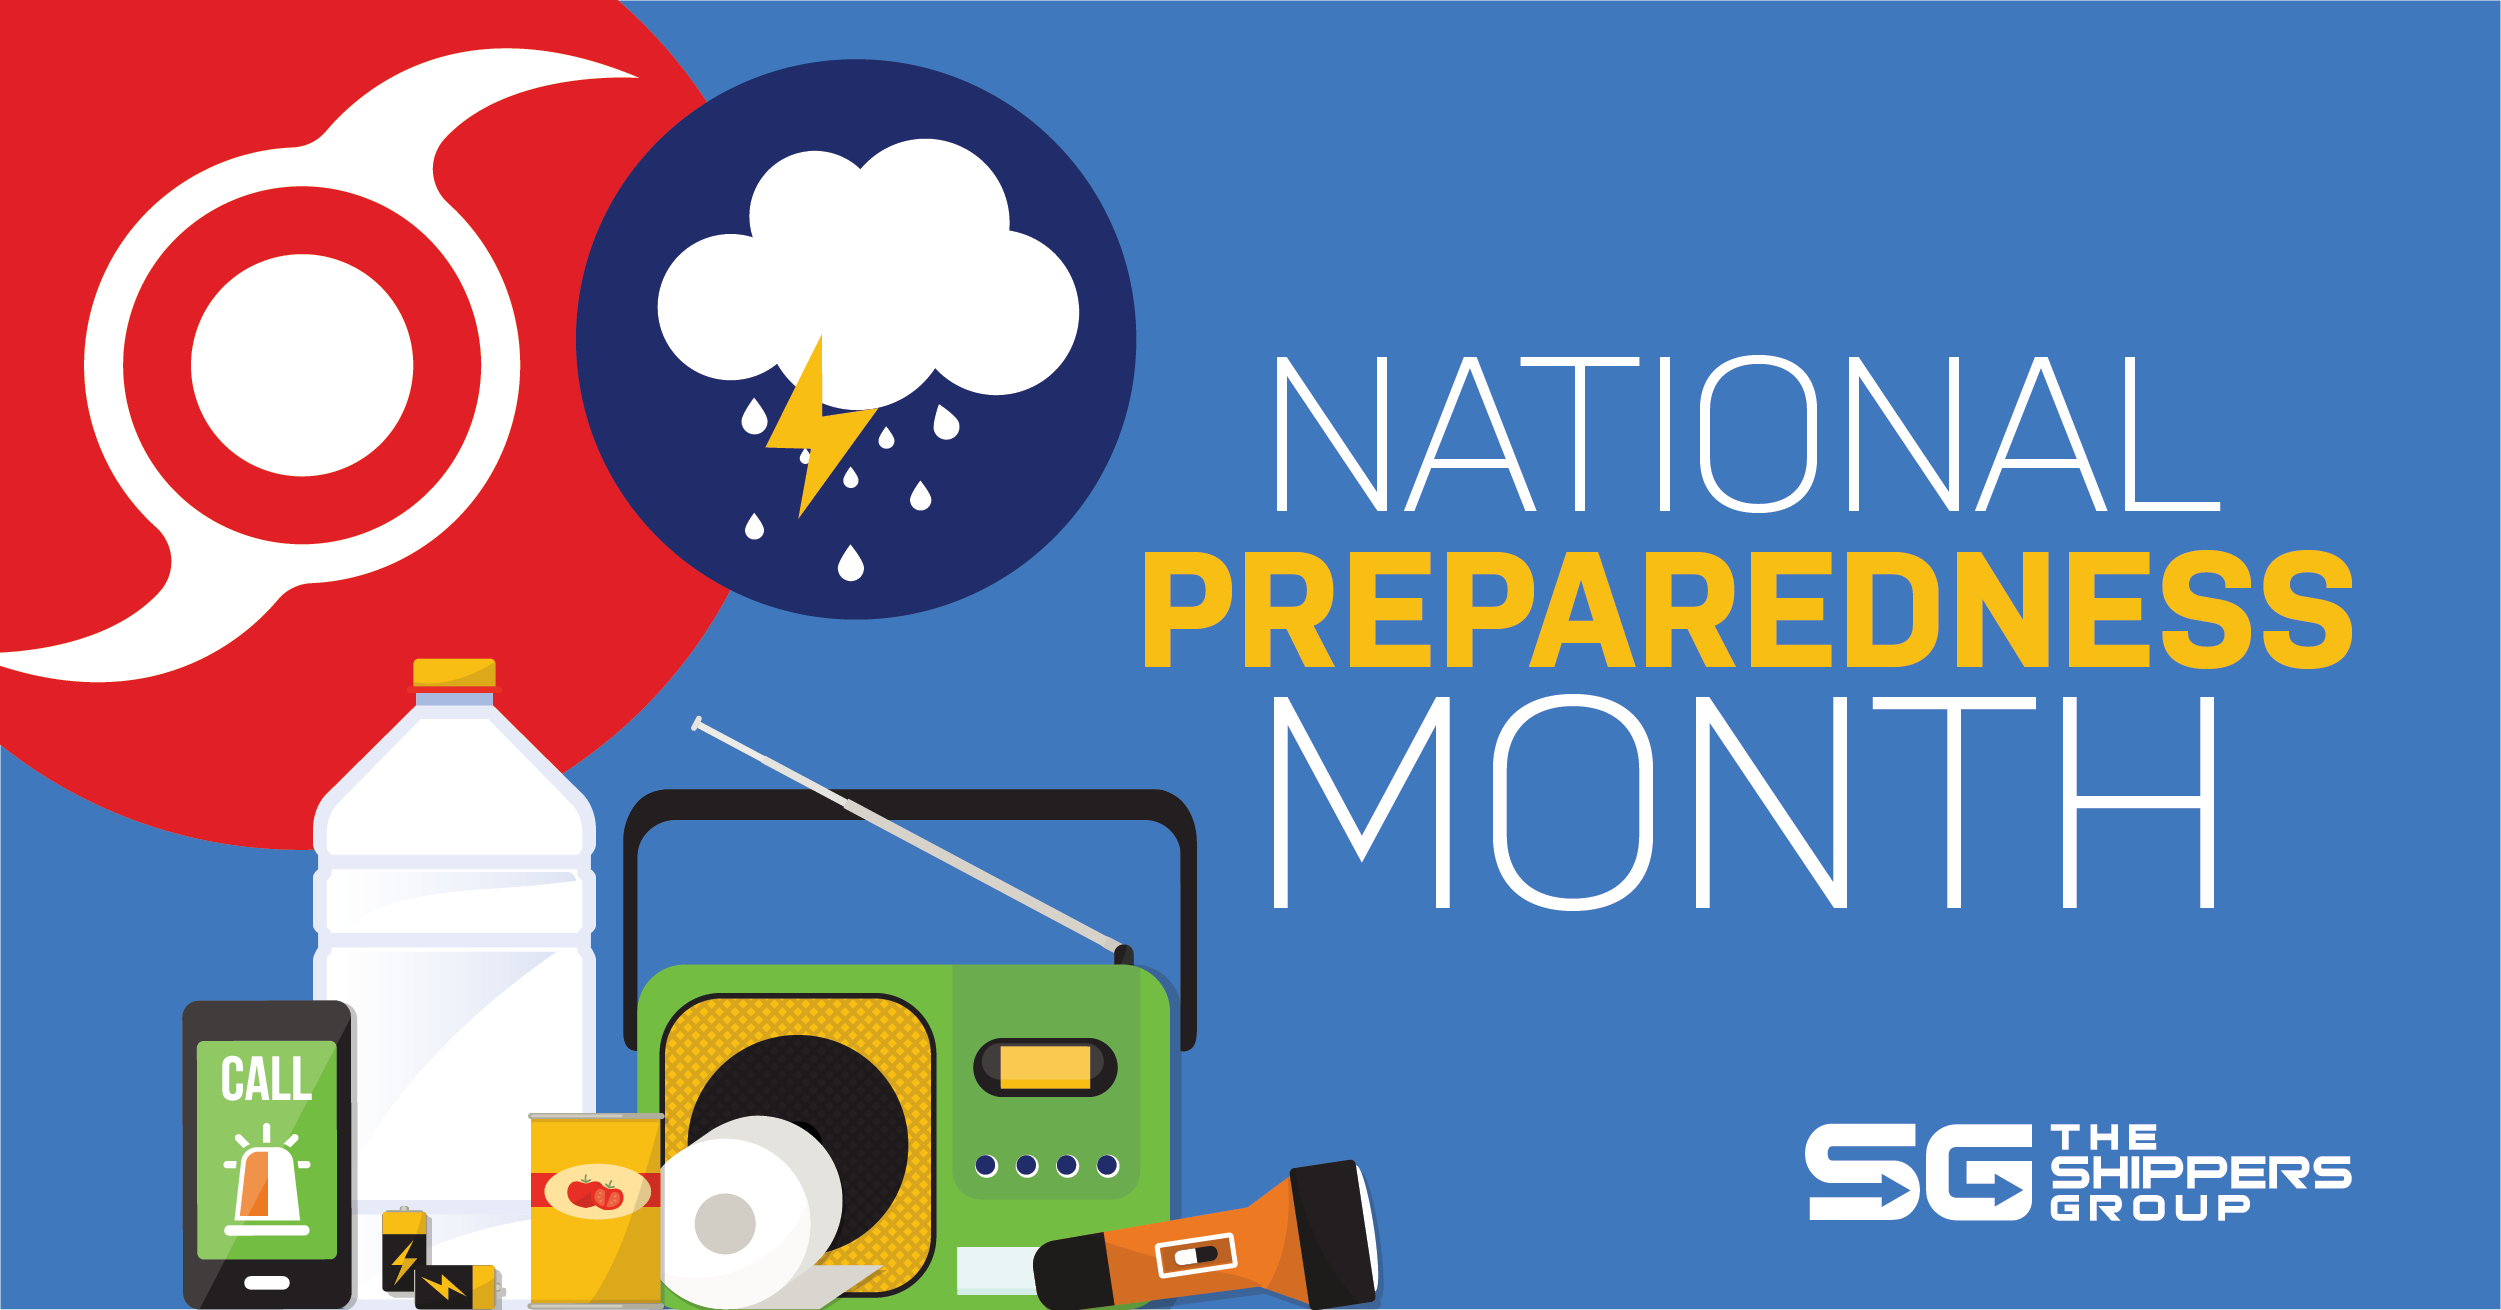 TSG Shares the Importance of National Preparedness Month